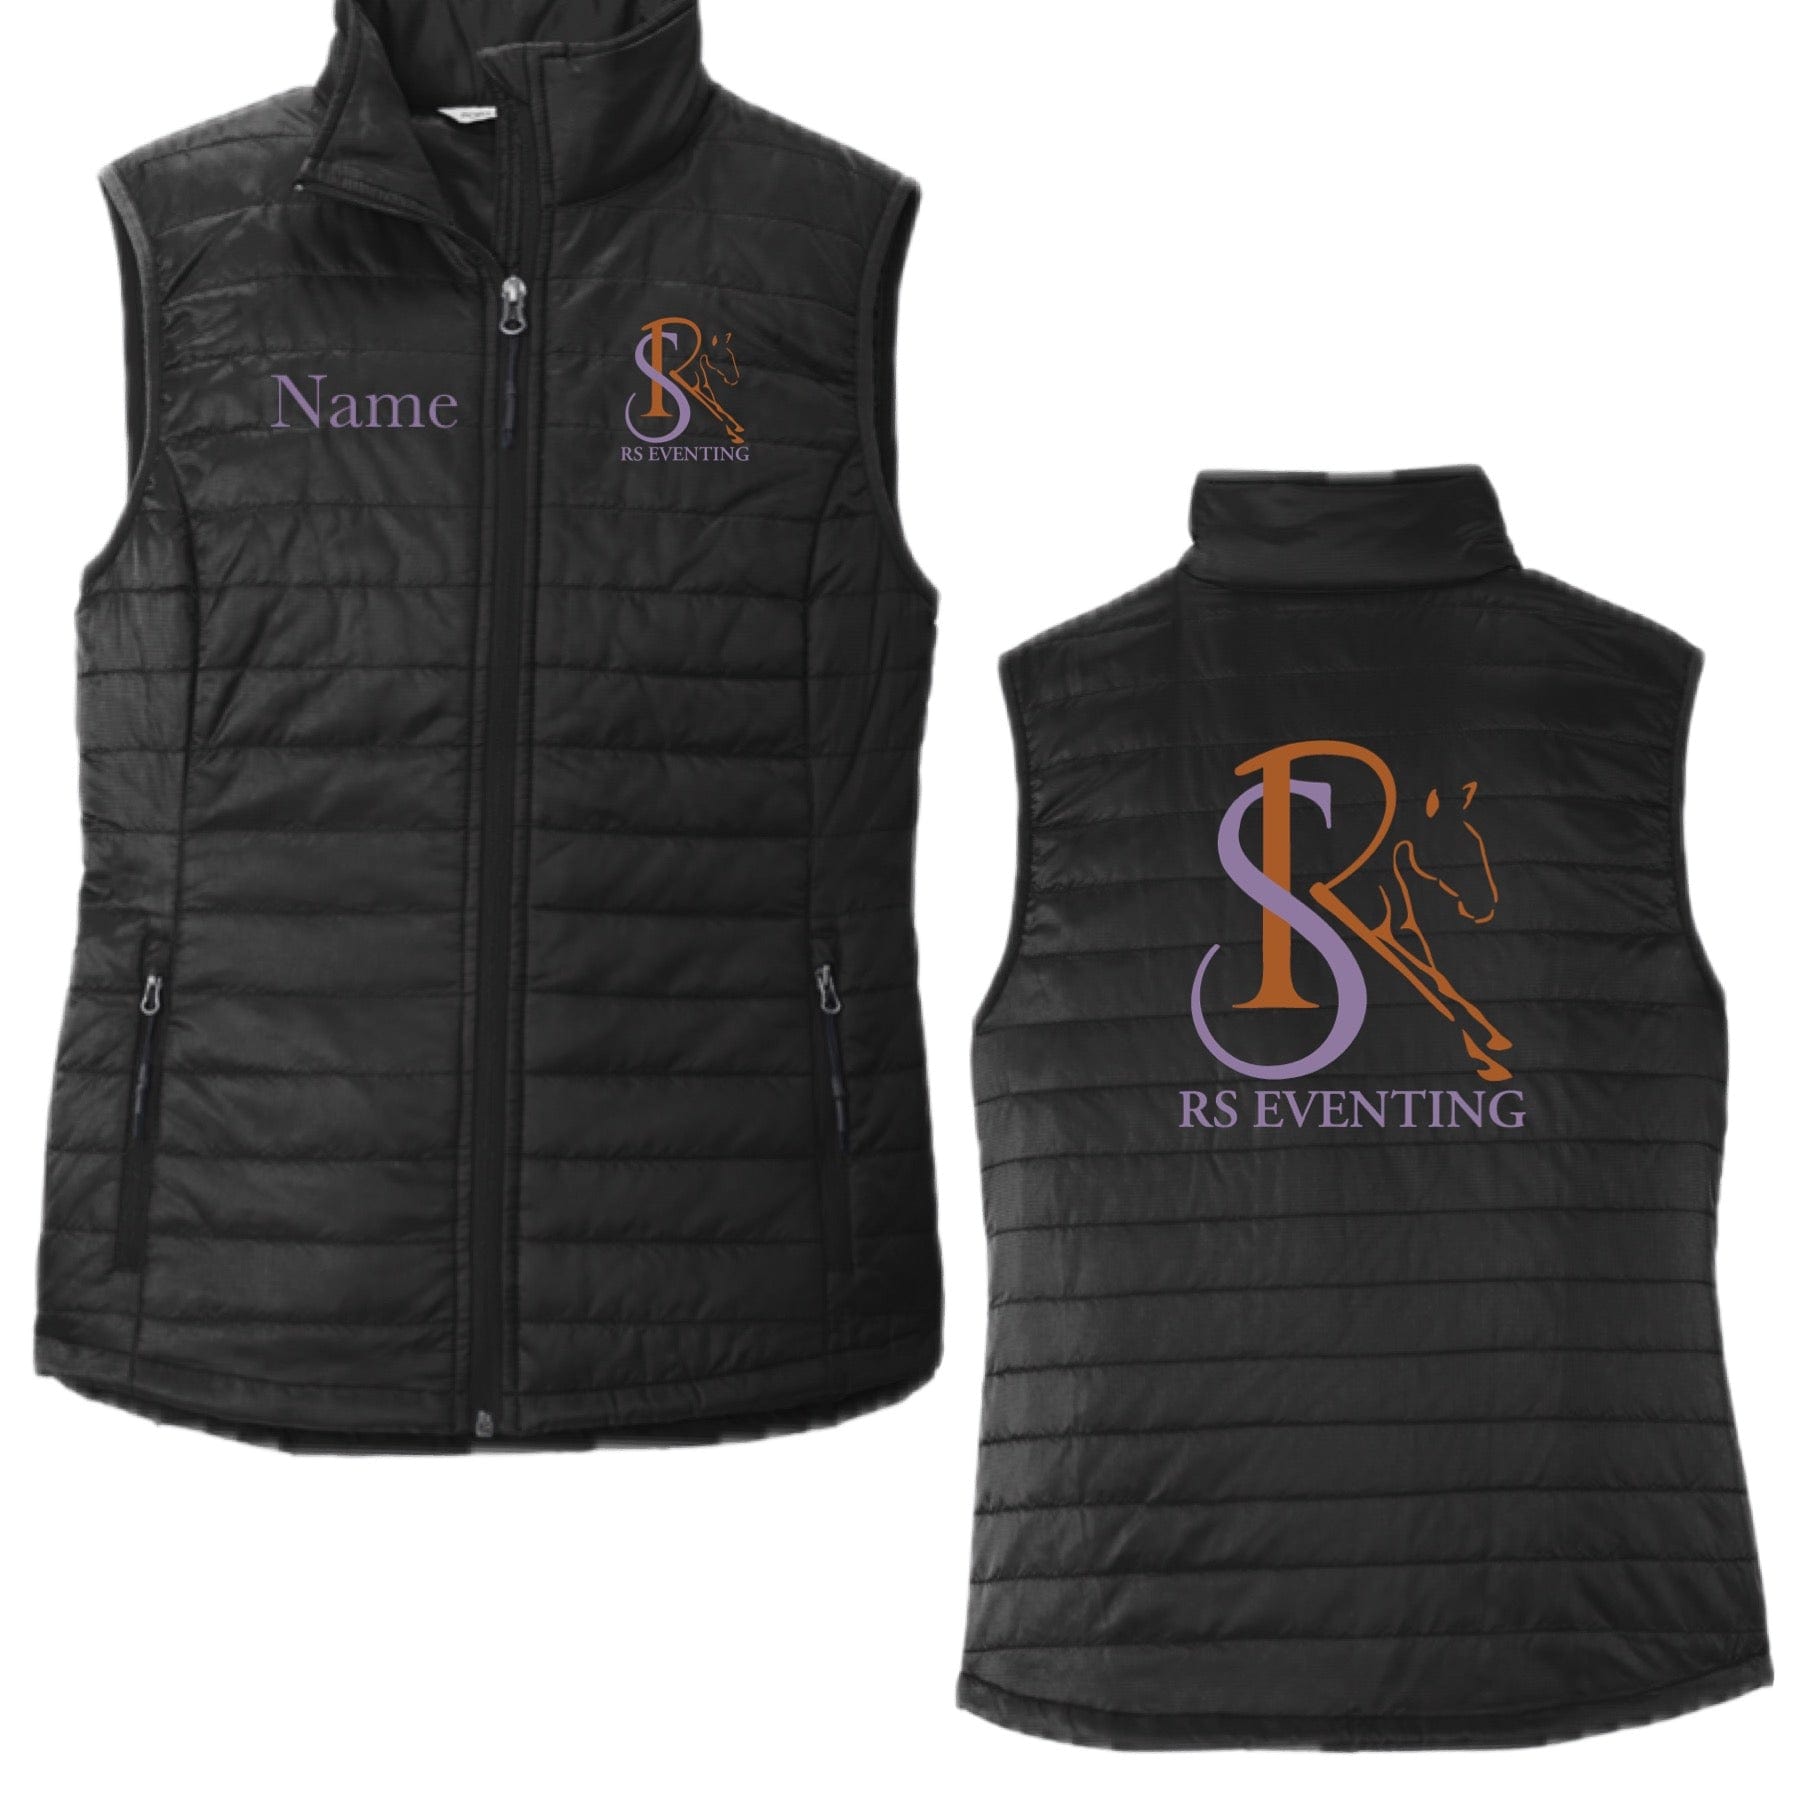 Equestrian Team Apparel RS Eventing Puffy Jacket and Vest equestrian team apparel online tack store mobile tack store custom farm apparel custom show stable clothing equestrian lifestyle horse show clothing riding clothes horses equestrian tack store